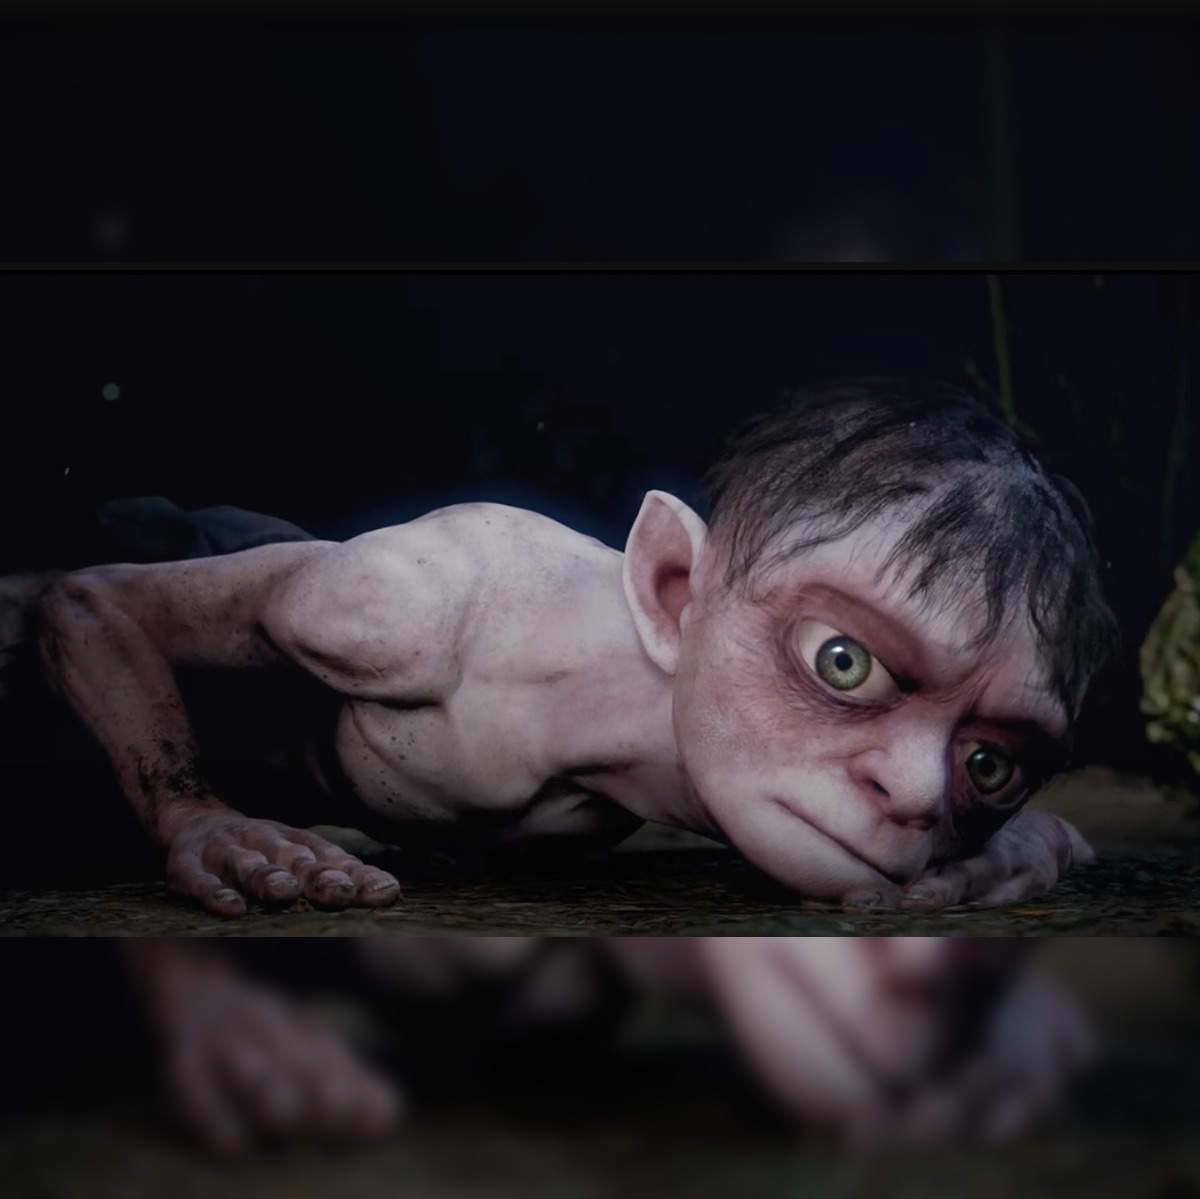 The Lord of the Rings: Gollum Game Developer Apologizes